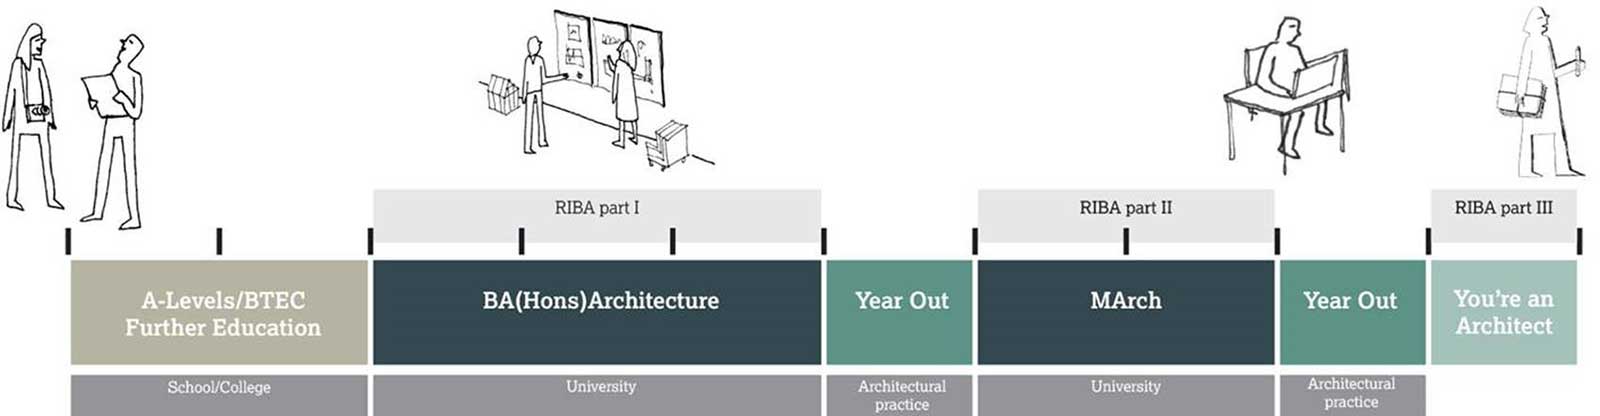 Architecture professional accreditation path as described above